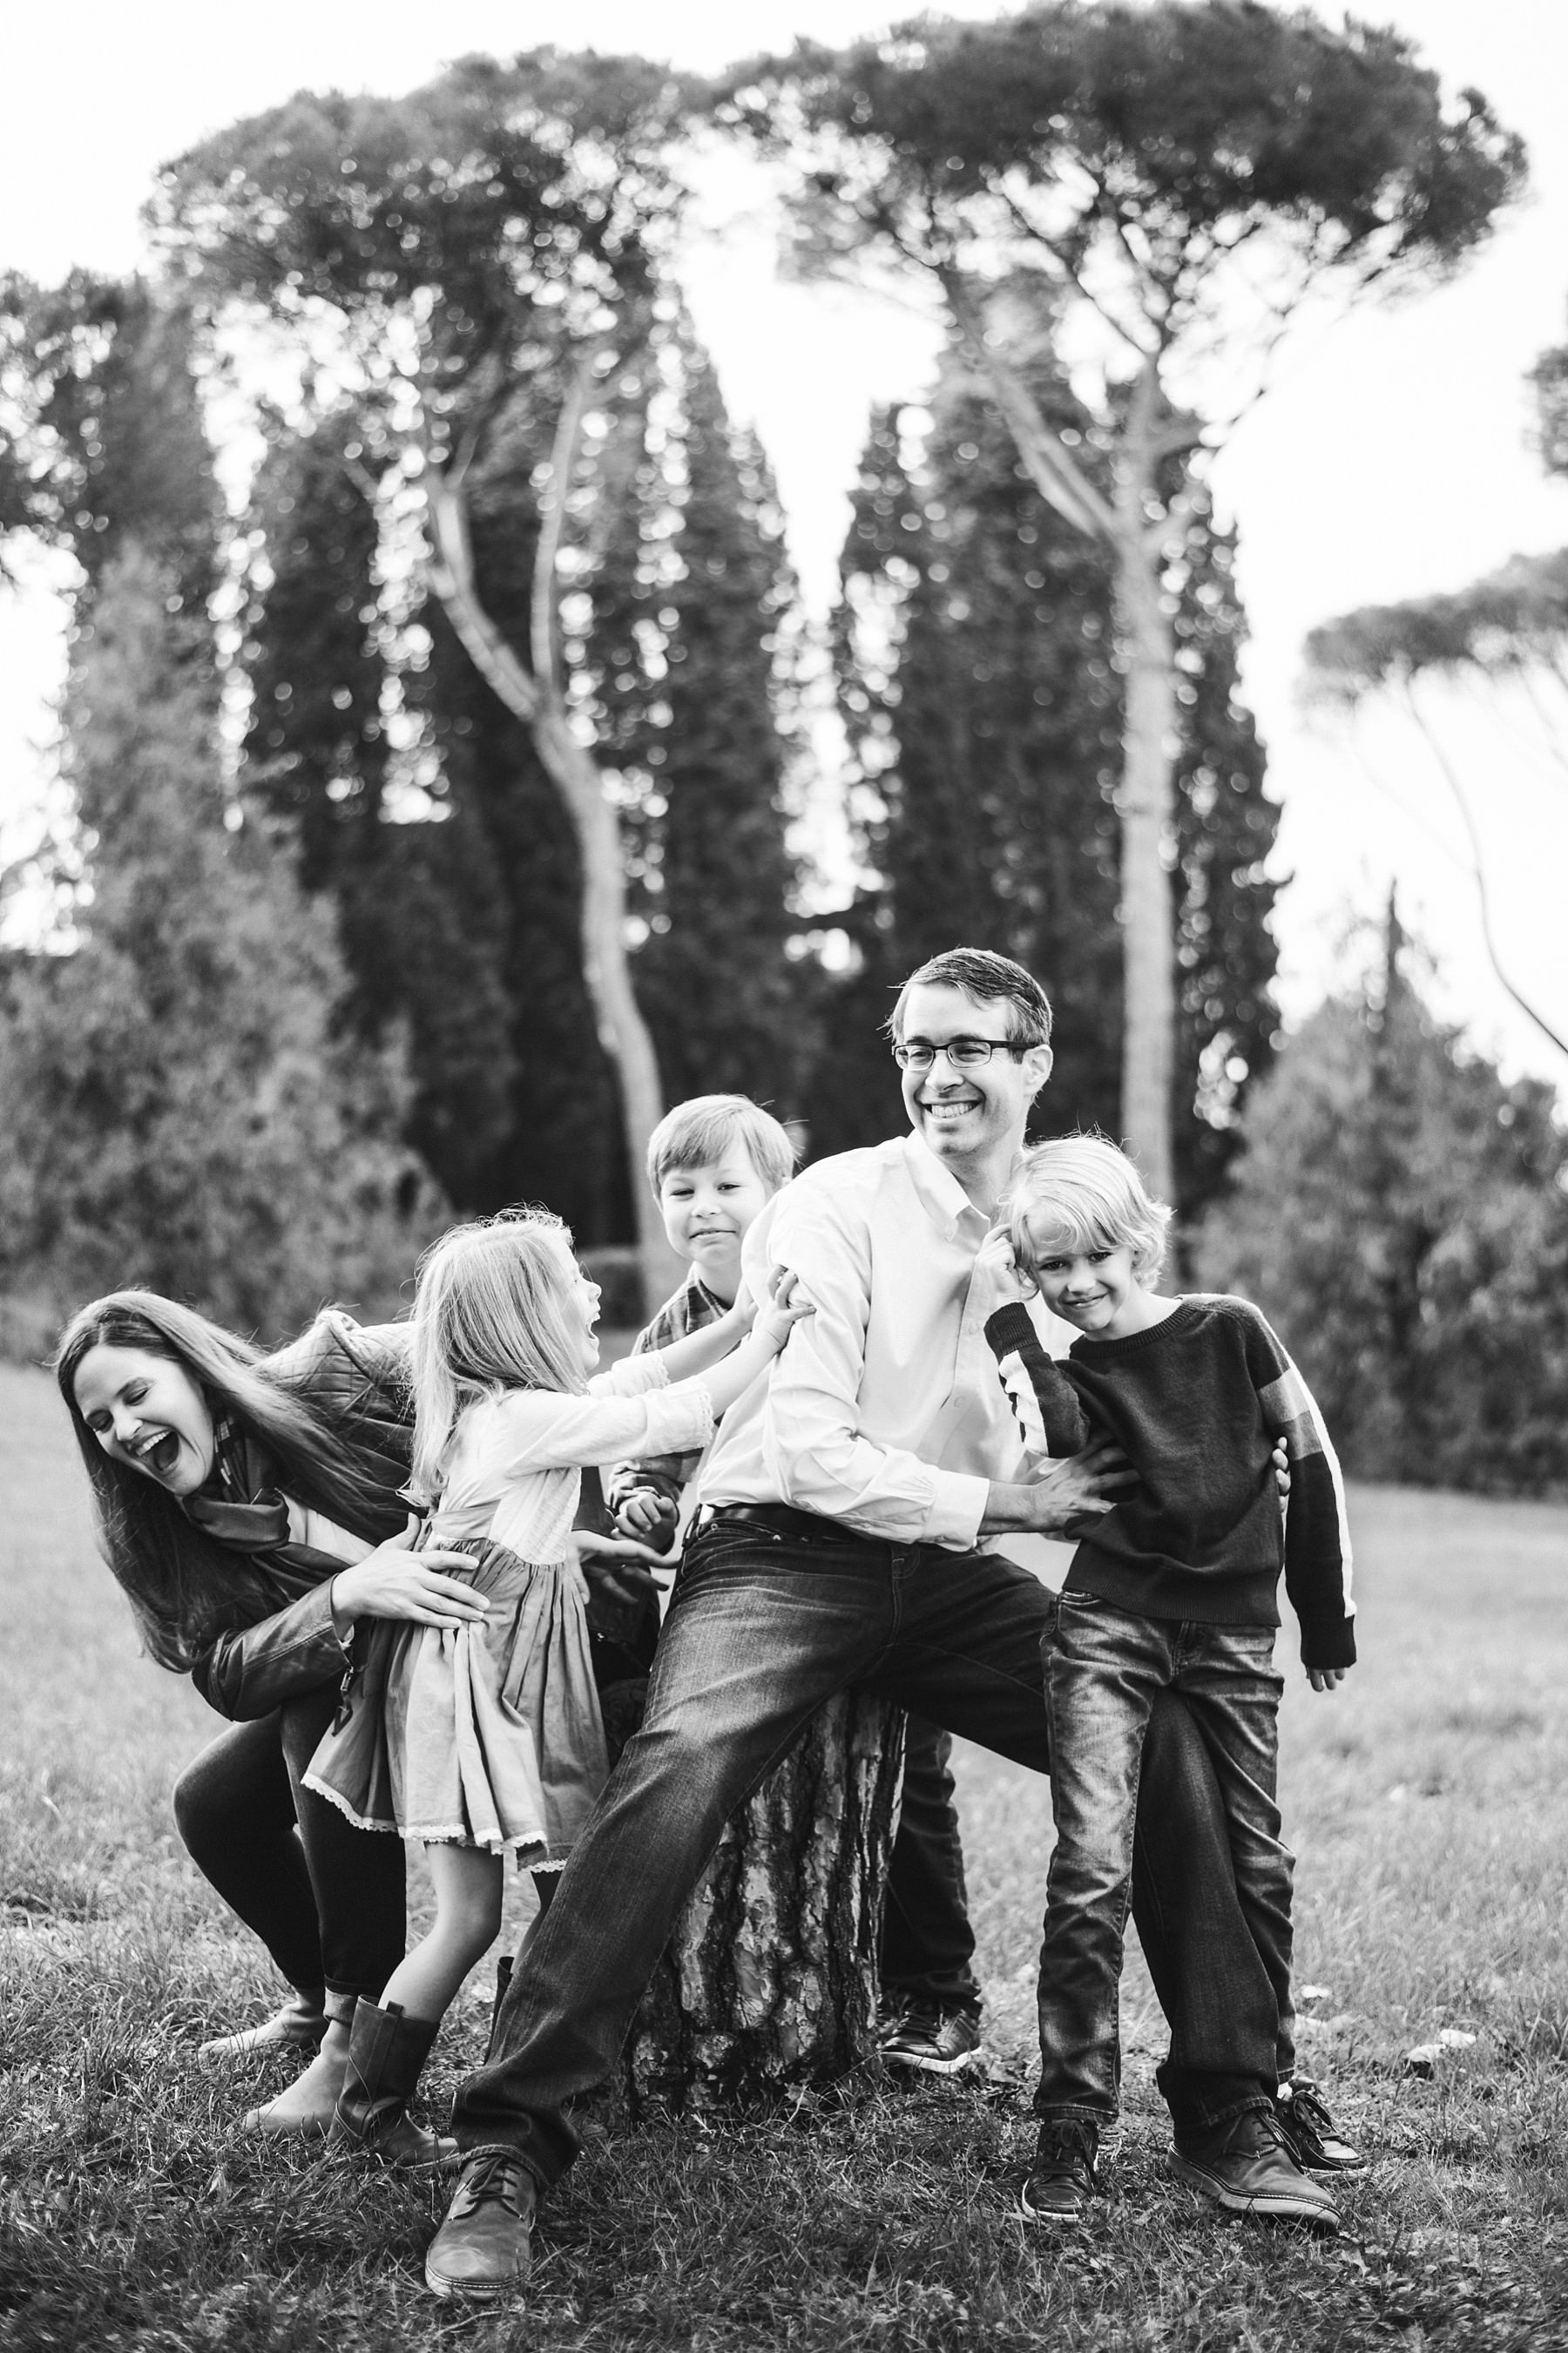 Hold happiness in a nutshell with a family photo shooting